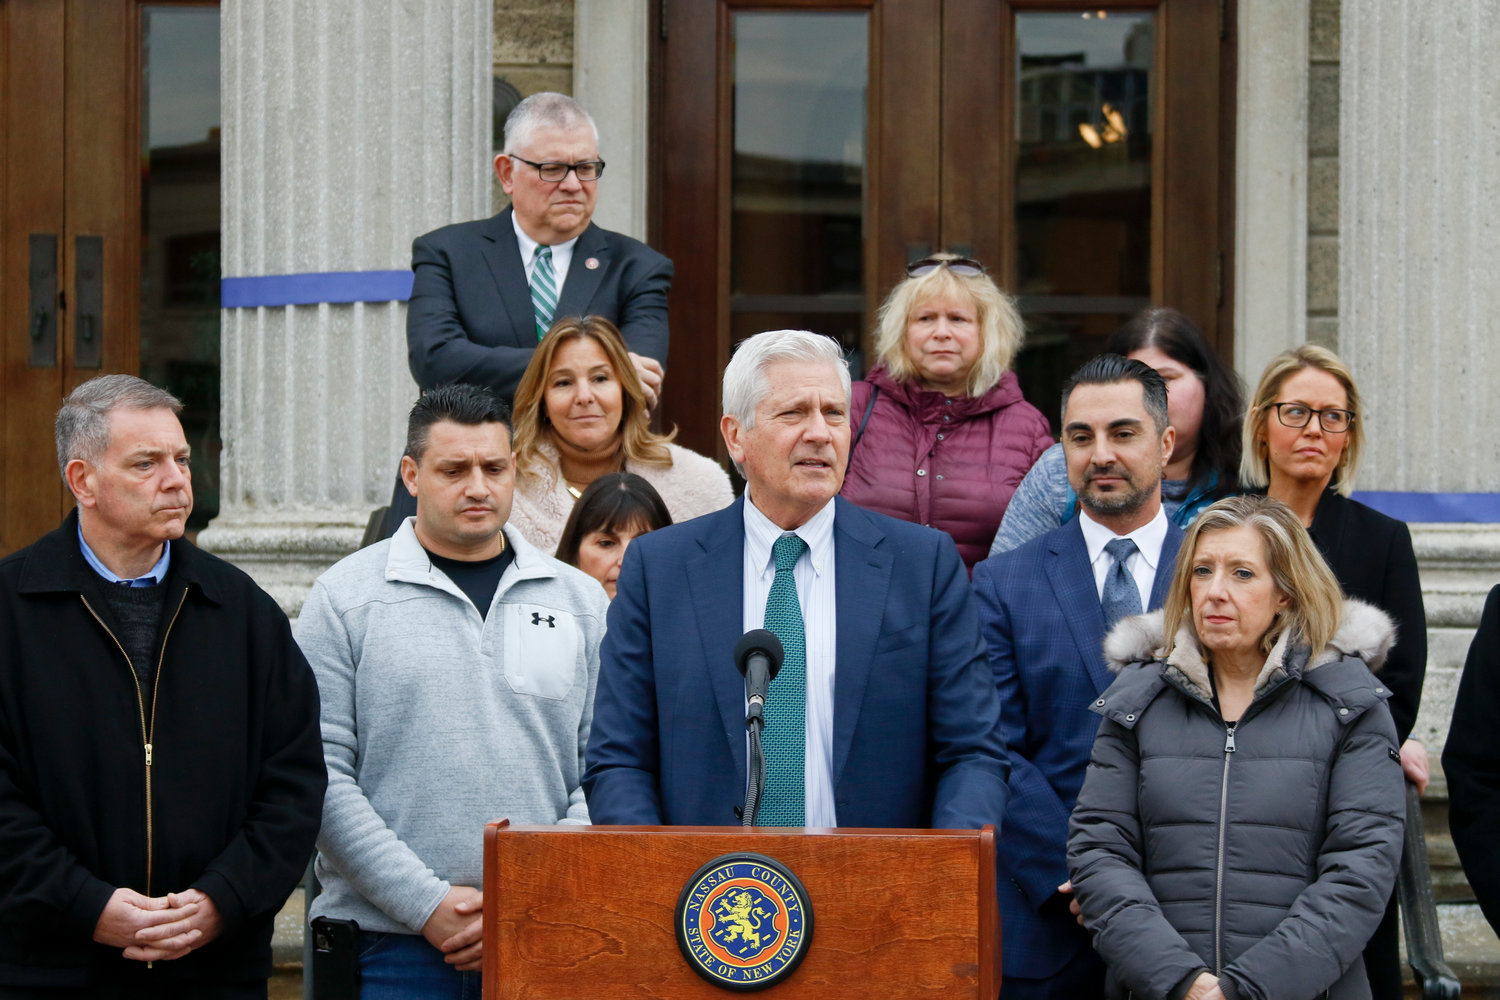 Nassau County Legislator Steve Rhoads, left, joined County Executive Bruce Blakeman as he announced support for a ruling against Gov. Kathy Hochul’s state mask mandate. To Blakeman’s left was Michael Demetriou, the lead plaintiff in the case against the mandate. They are surrounded by members of local school boards and a Wantagh parent expressing opposition to the mask mandate.